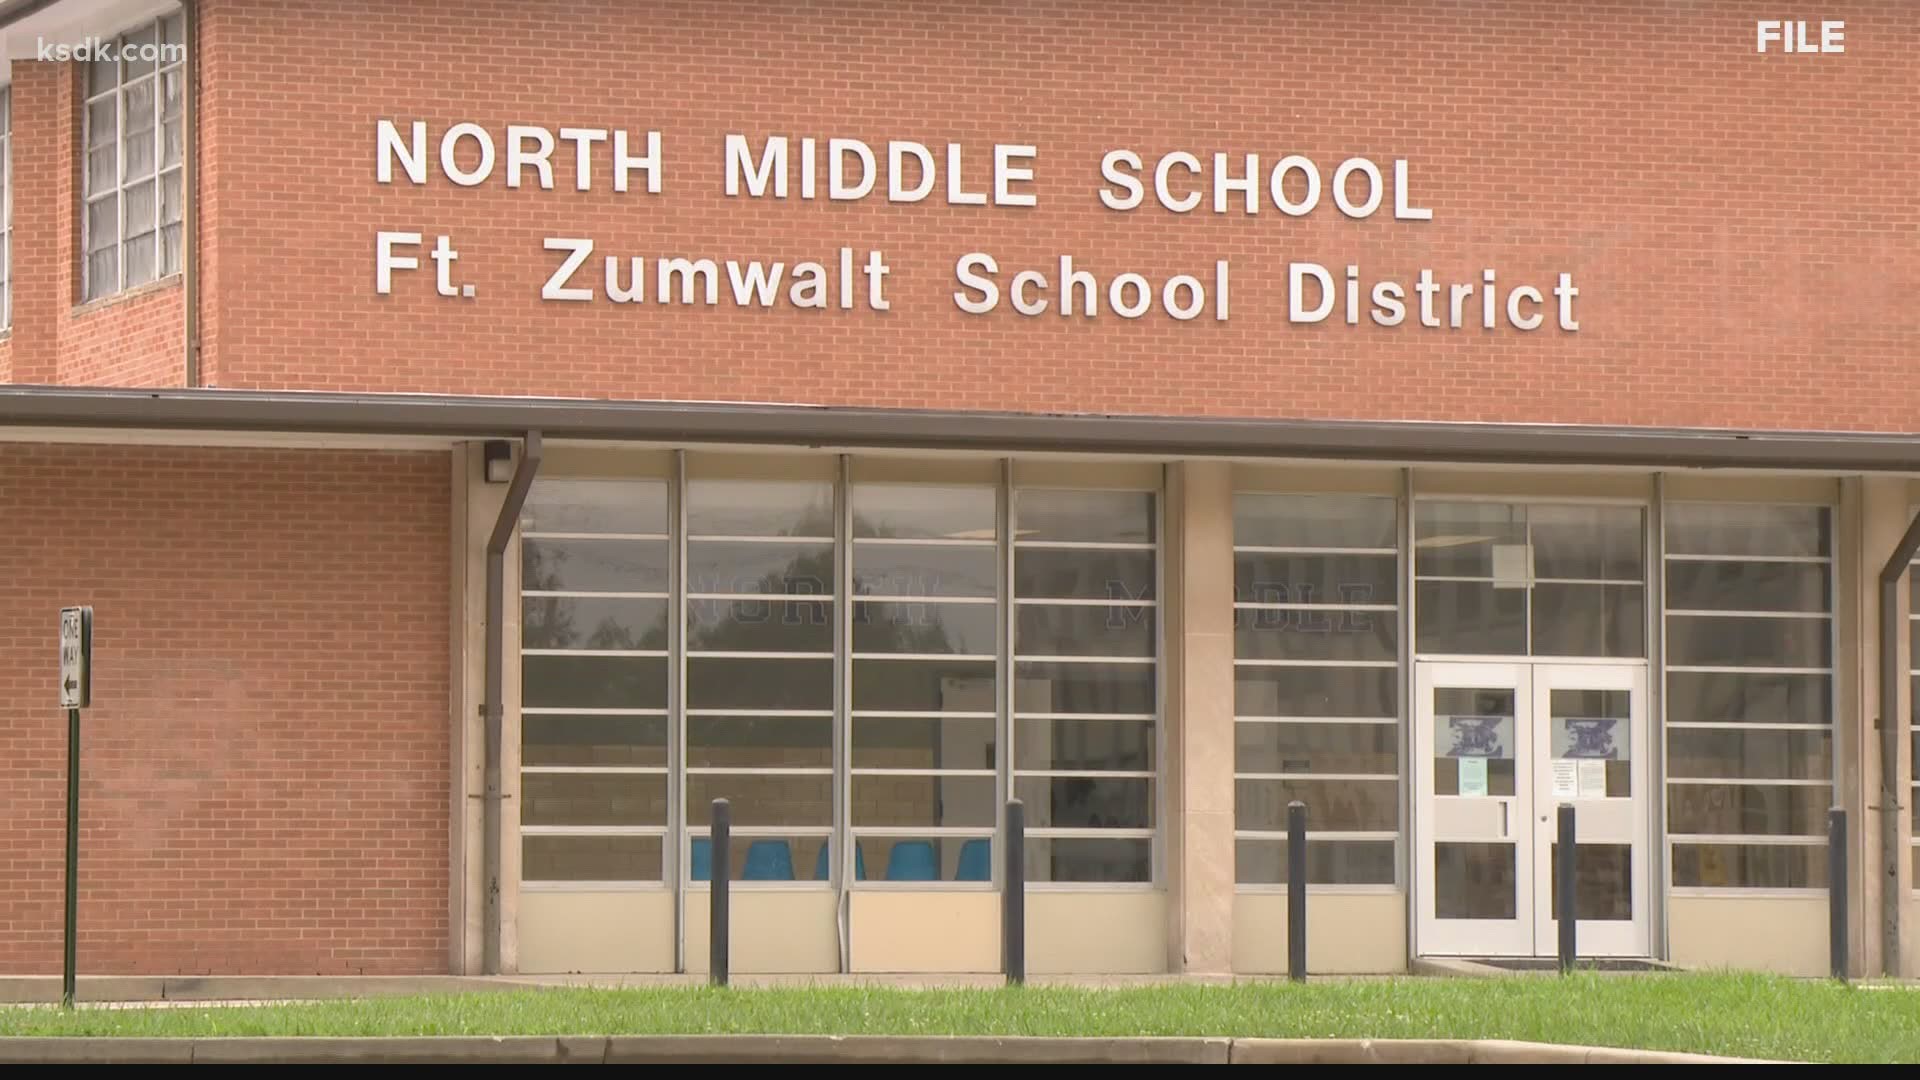 It's back to school for Fort Zumwalt and St. Louis Public School students